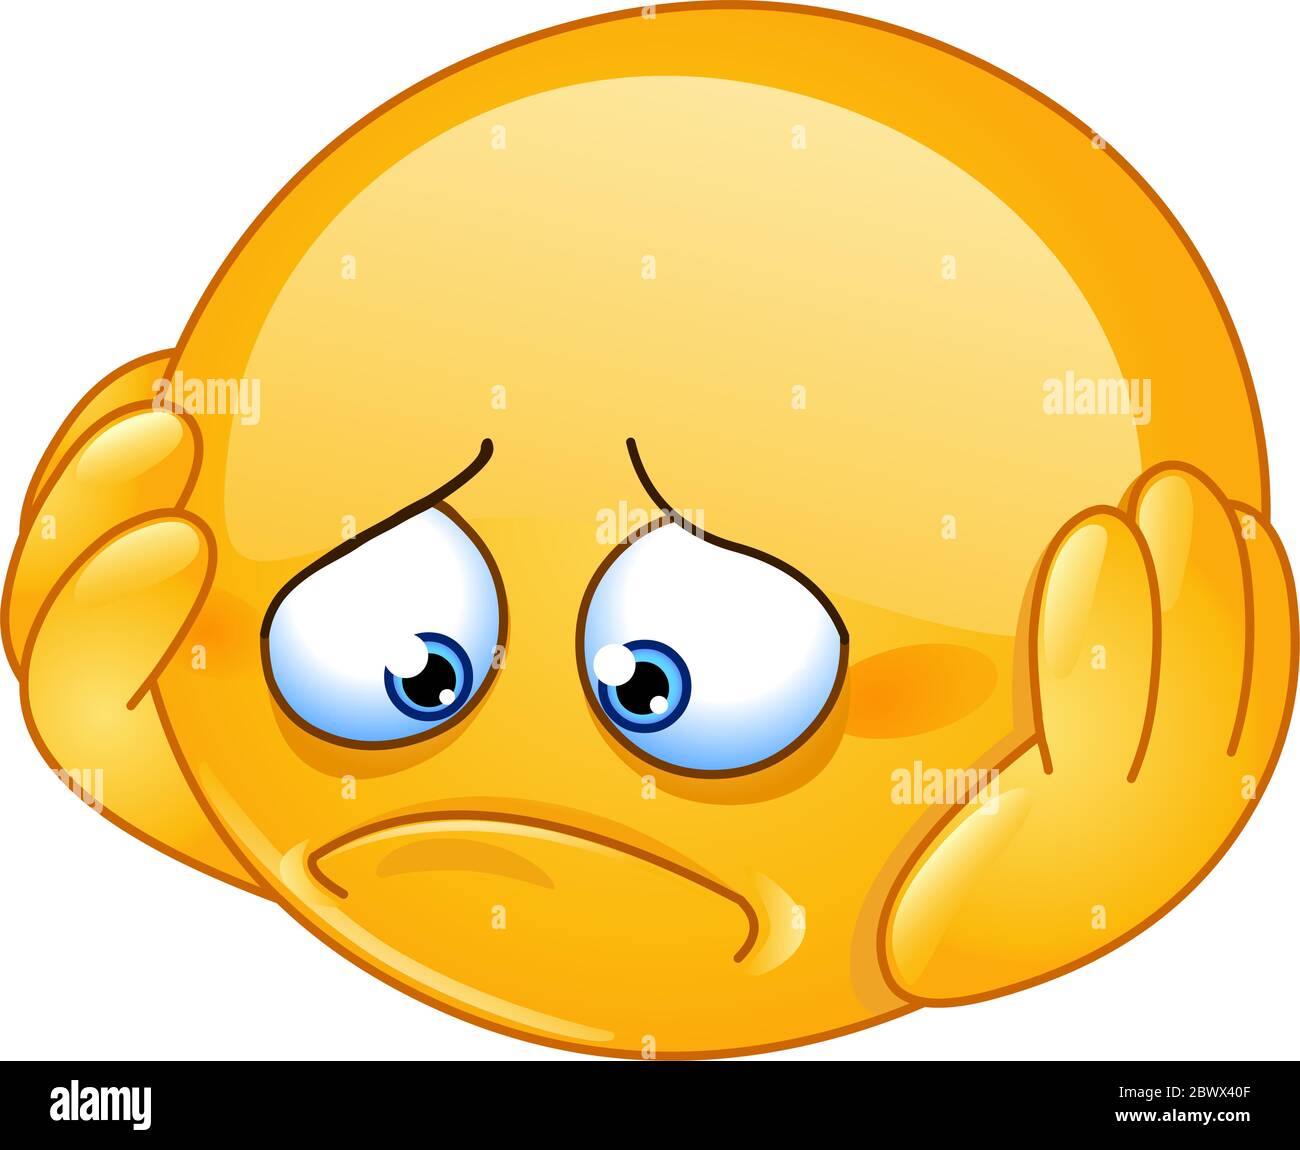 Sad face ball Cut Out Stock Images & Pictures - Alamy